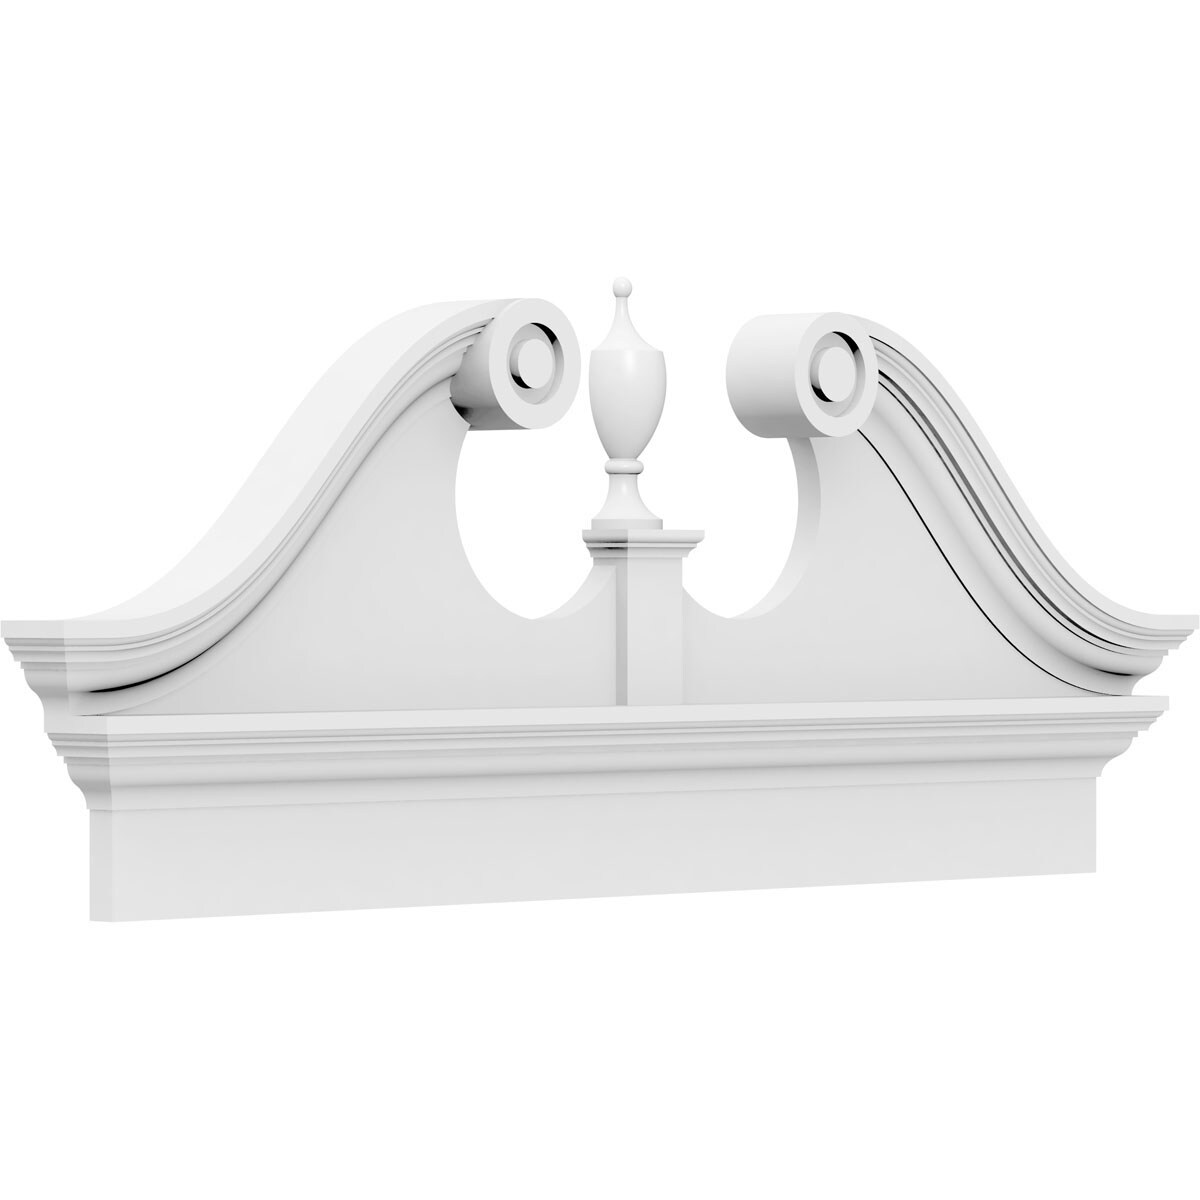 Ekena Millwork Rams Head 60-in x 21-7/8-in Unfinished PVC Pediment Entry Door Casing Accent in White | PEDPC060X220RHP00